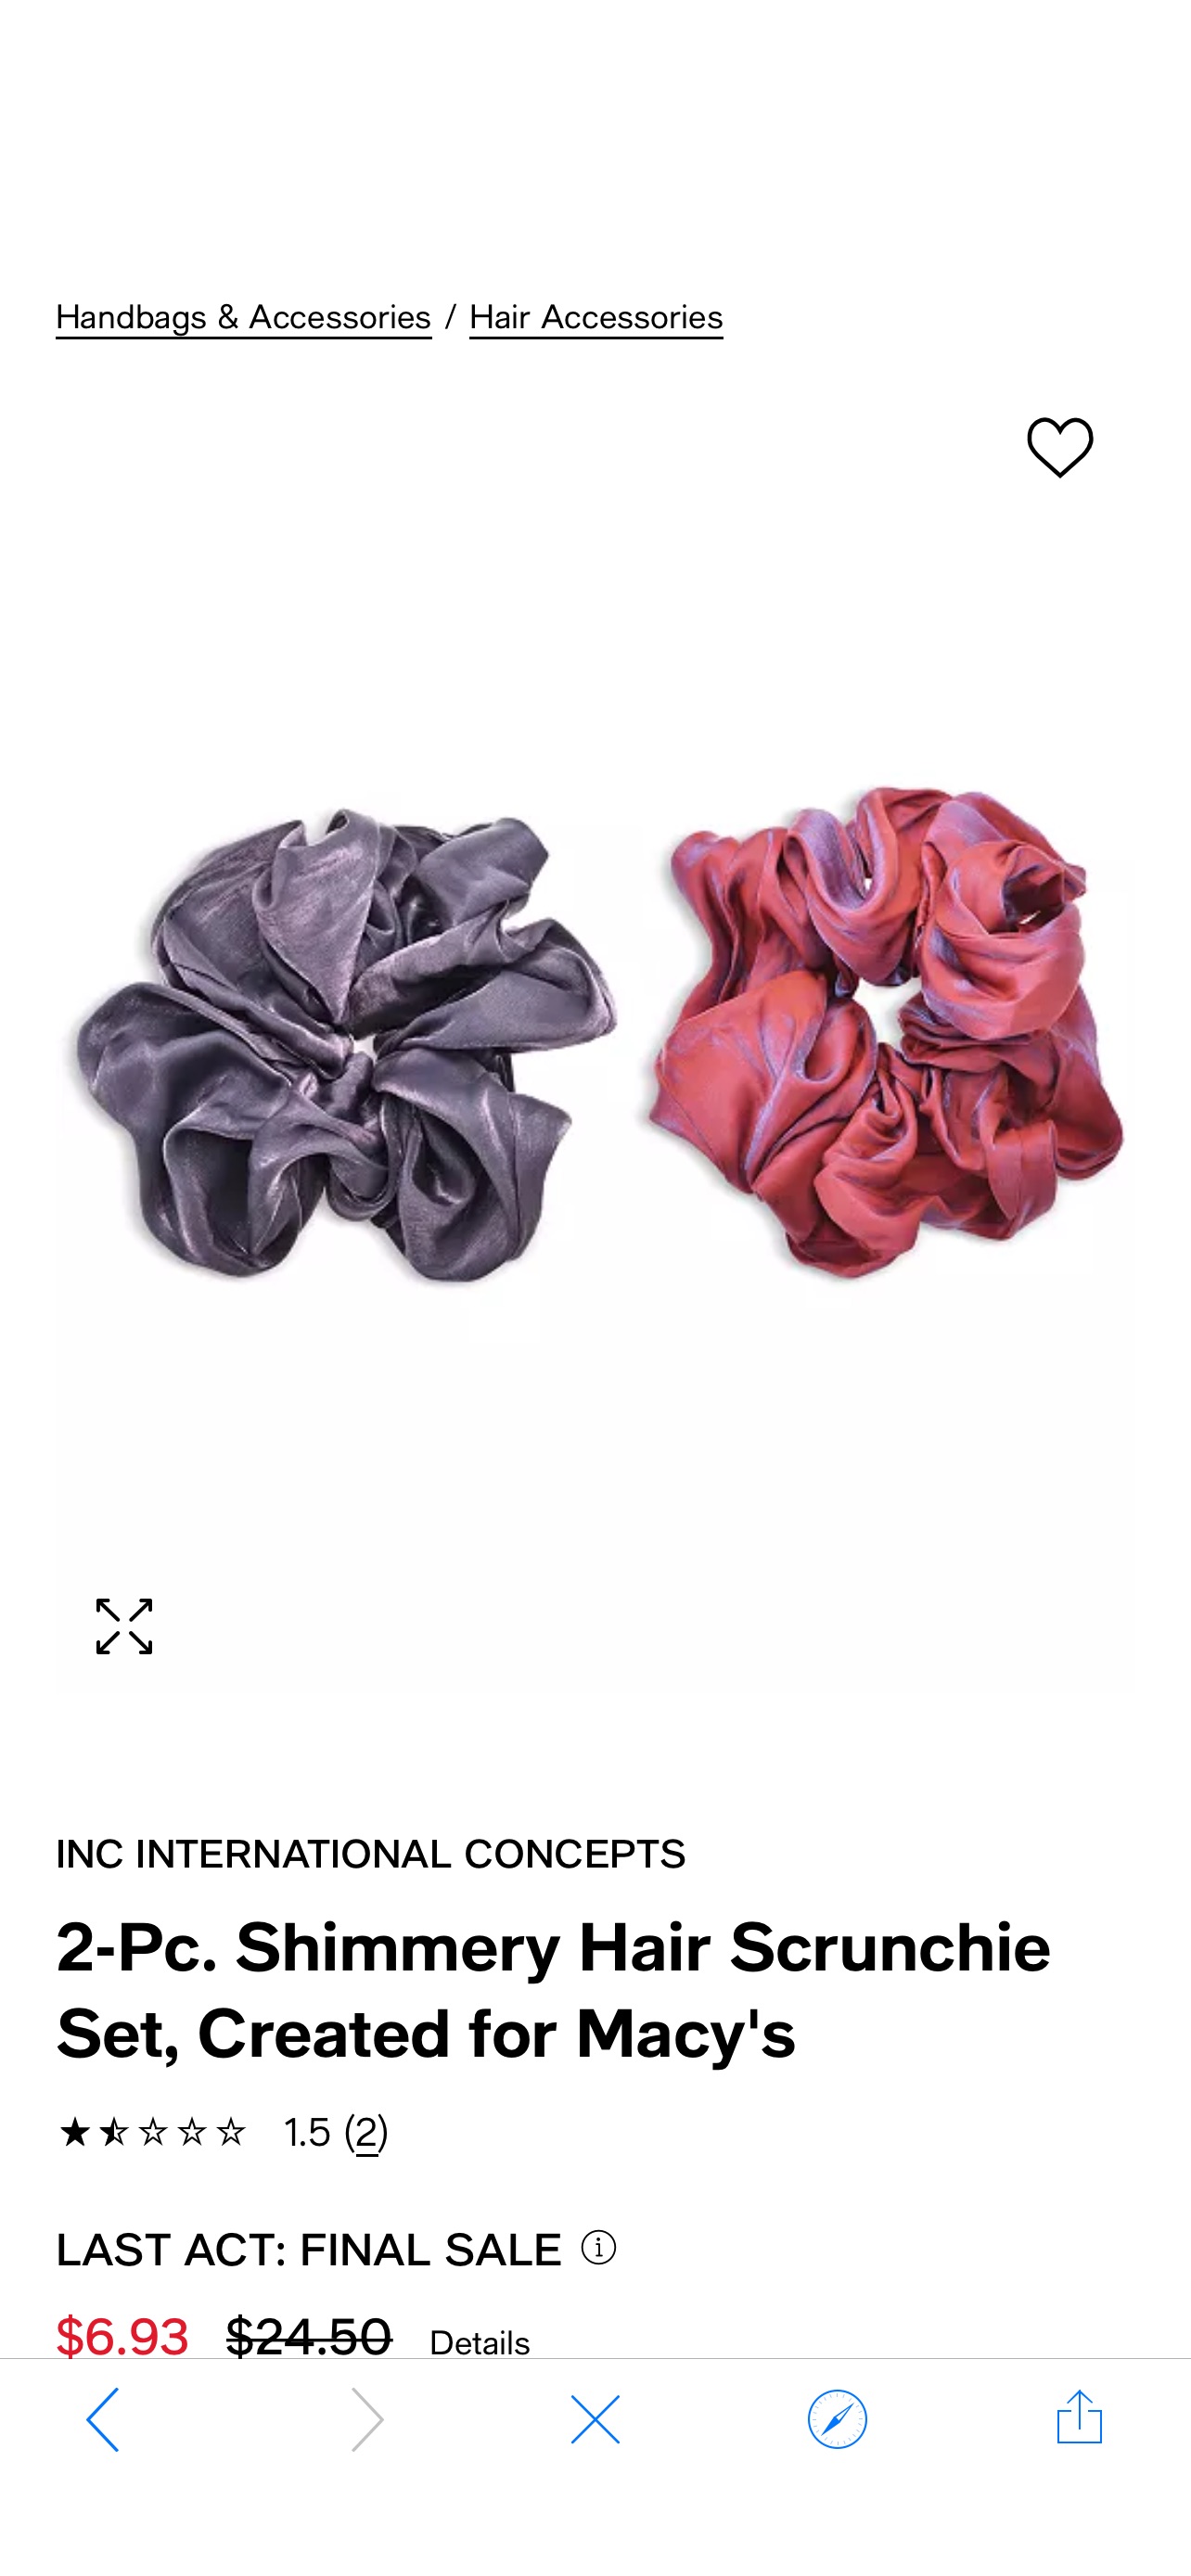 INC International Concepts 2-Pc. Shimmery Hair Scrunchie Set, Created for Macy's & Reviews - Hair Accessories - Handbags & Accessories - Macy's